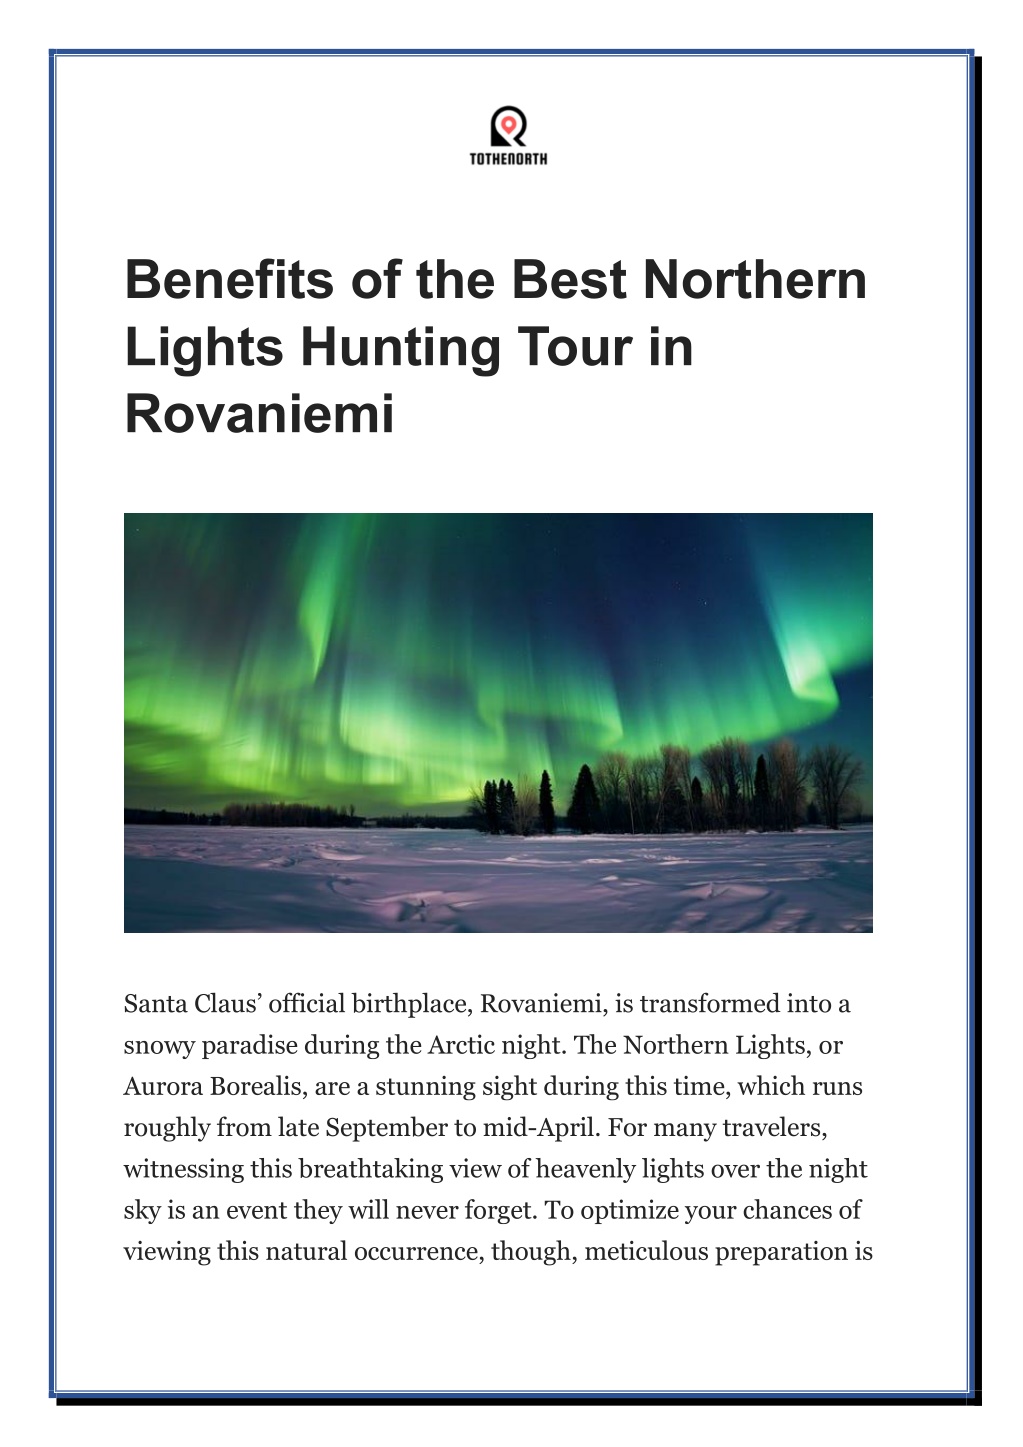 benefits of the best northern lights hunting tour l.w